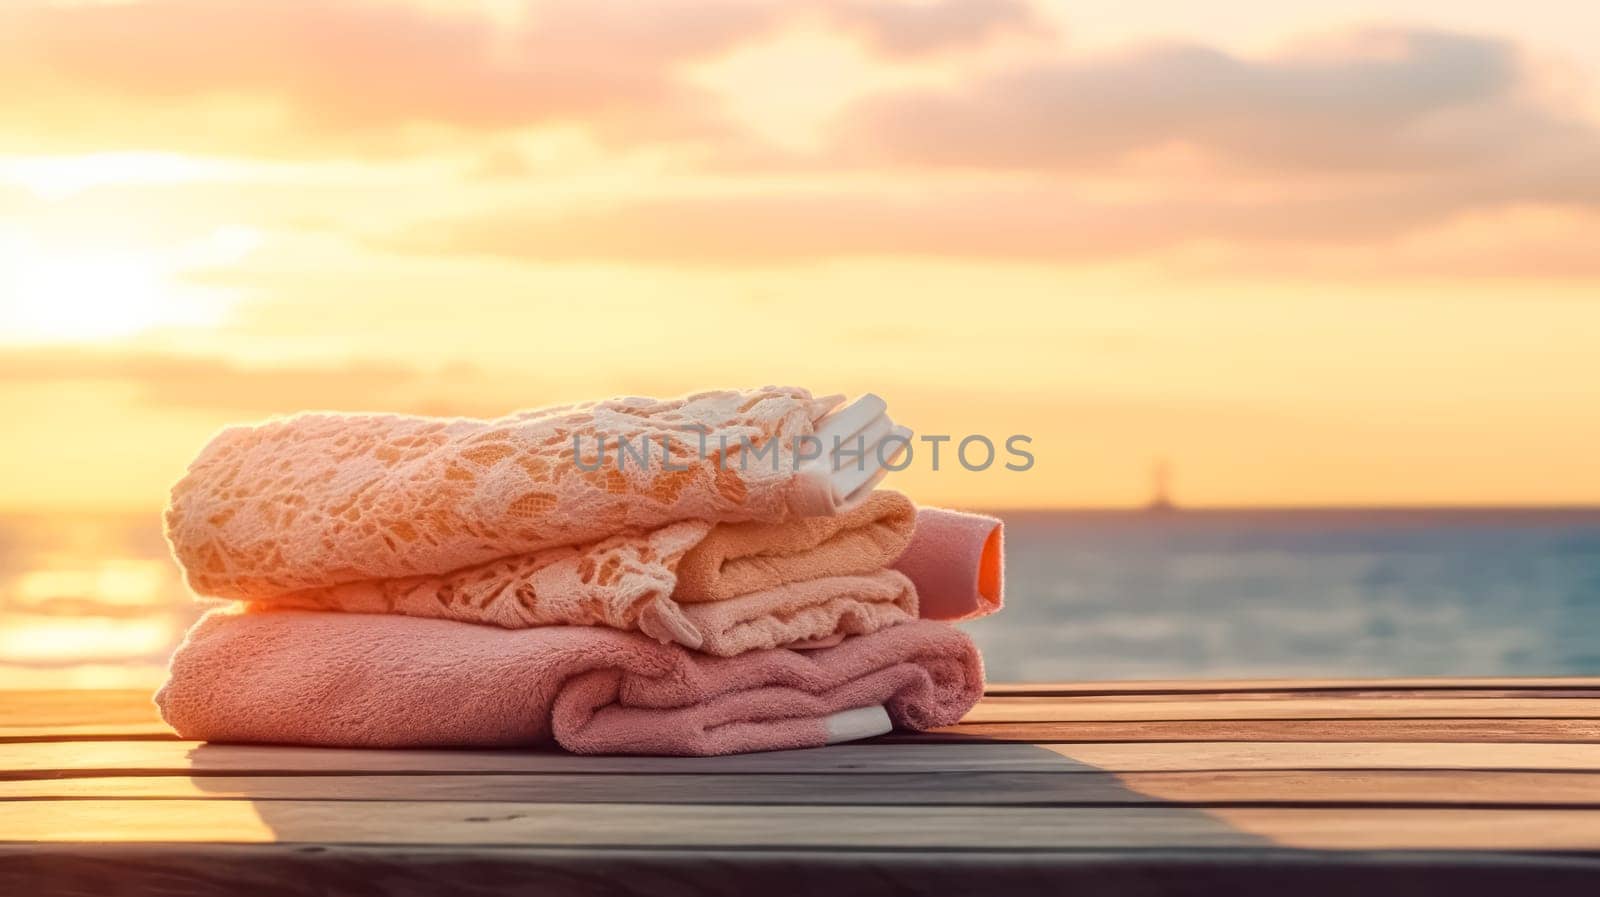 A stack of towels rests on a table against the backdrop of a beach sunset by Alla_Morozova93